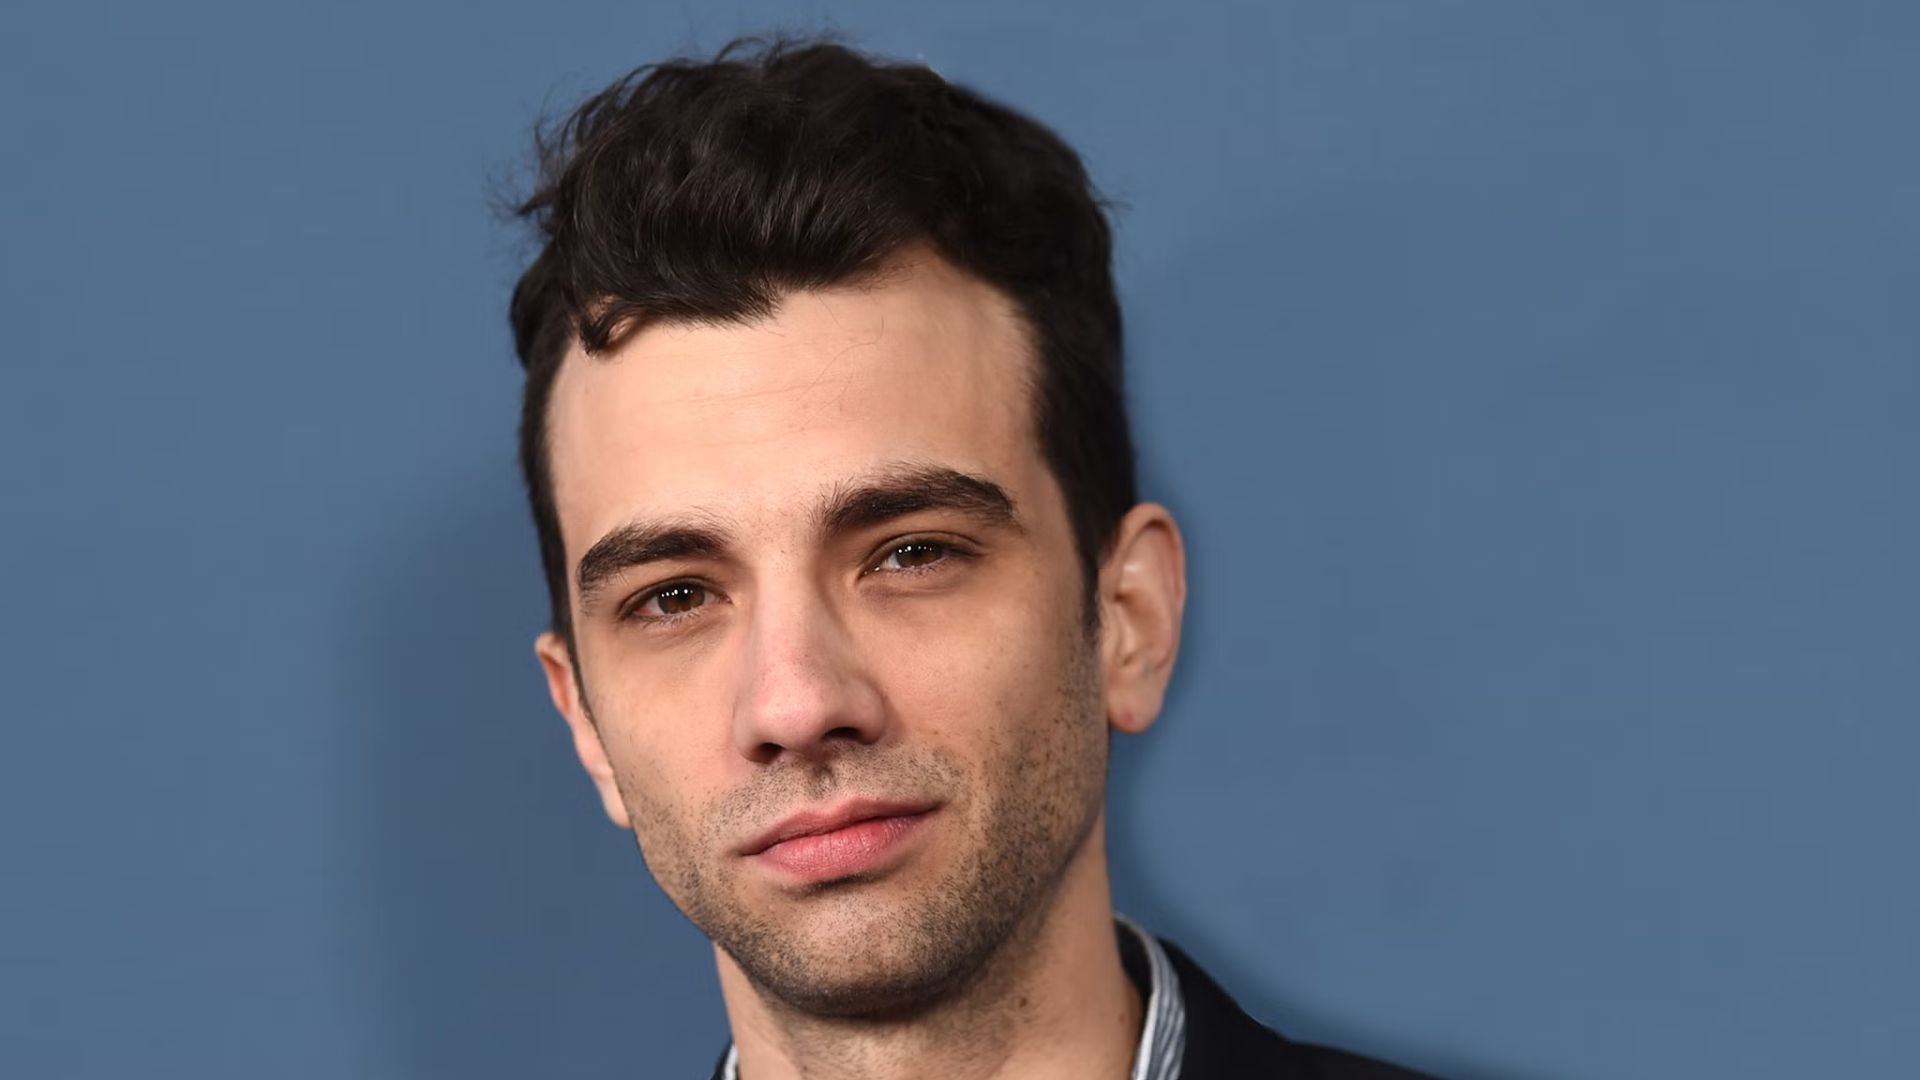 Jay Baruchel - A Canadian Actor, Comedian, Director And Screenwriter